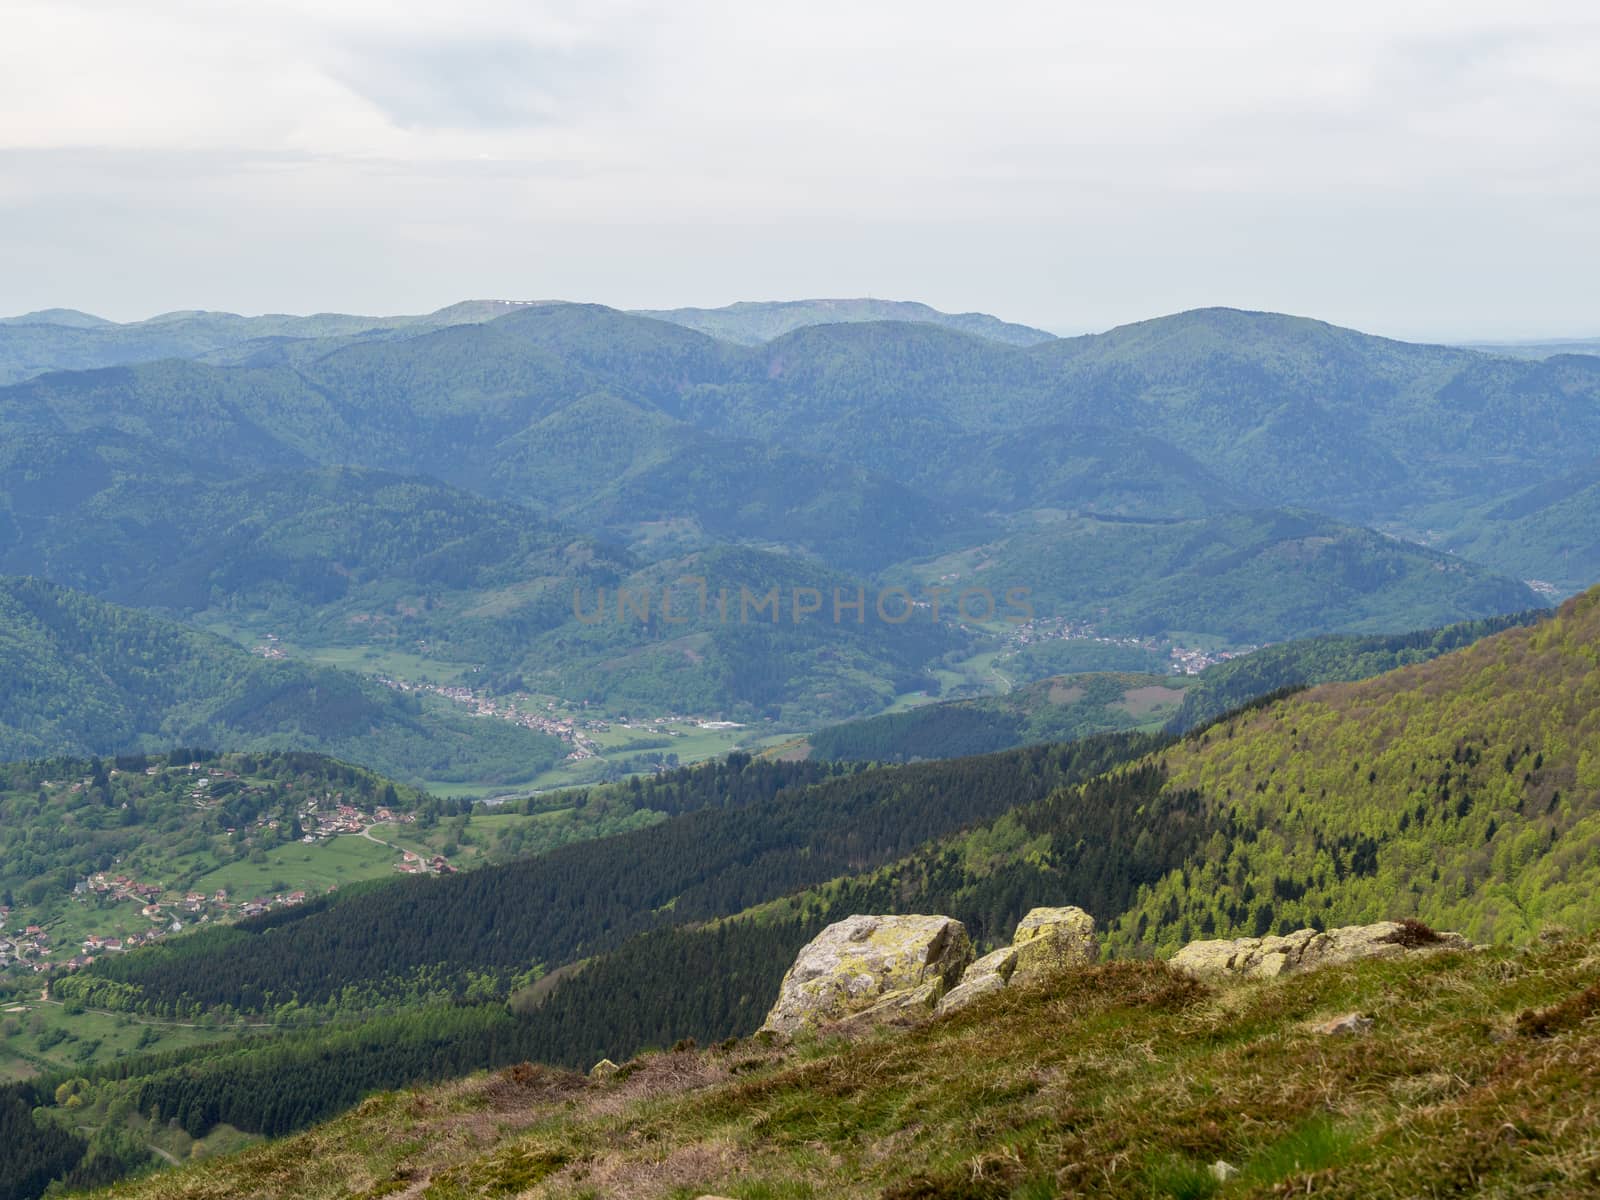 View past rocks looking over villages in the Vosges mountains